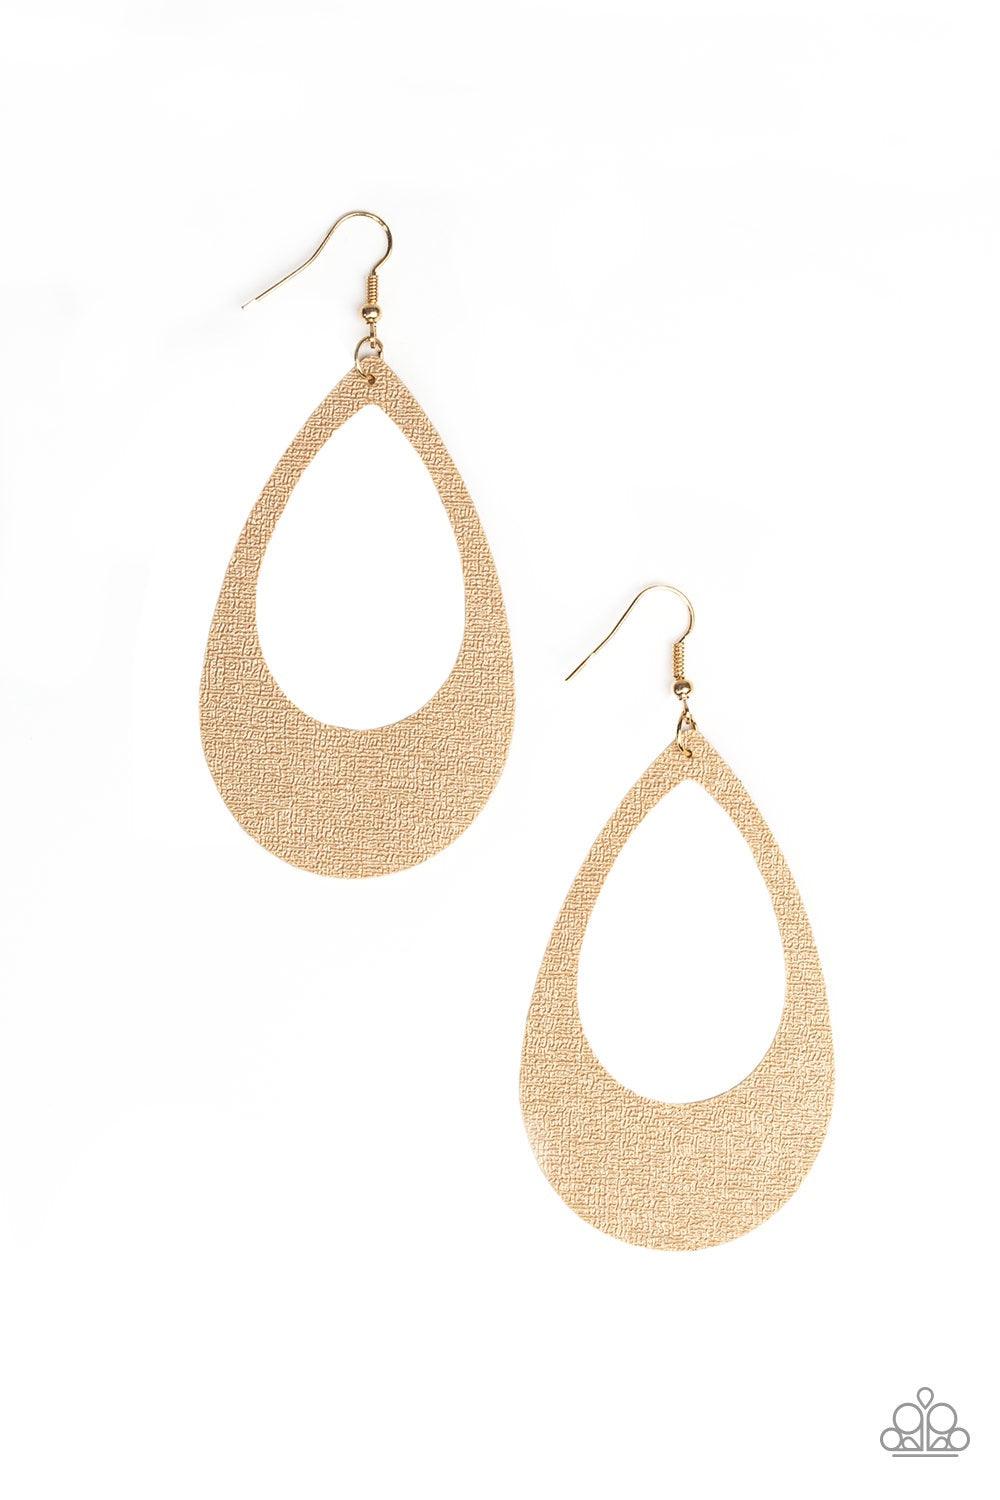 Paparazzi Accessories What A Natural - Gold Brushed in a golden finish, a textured leather teardrop frame swings from the ear for a trendy look. Earring attaches to a standard fishhook fitting. Jewelry